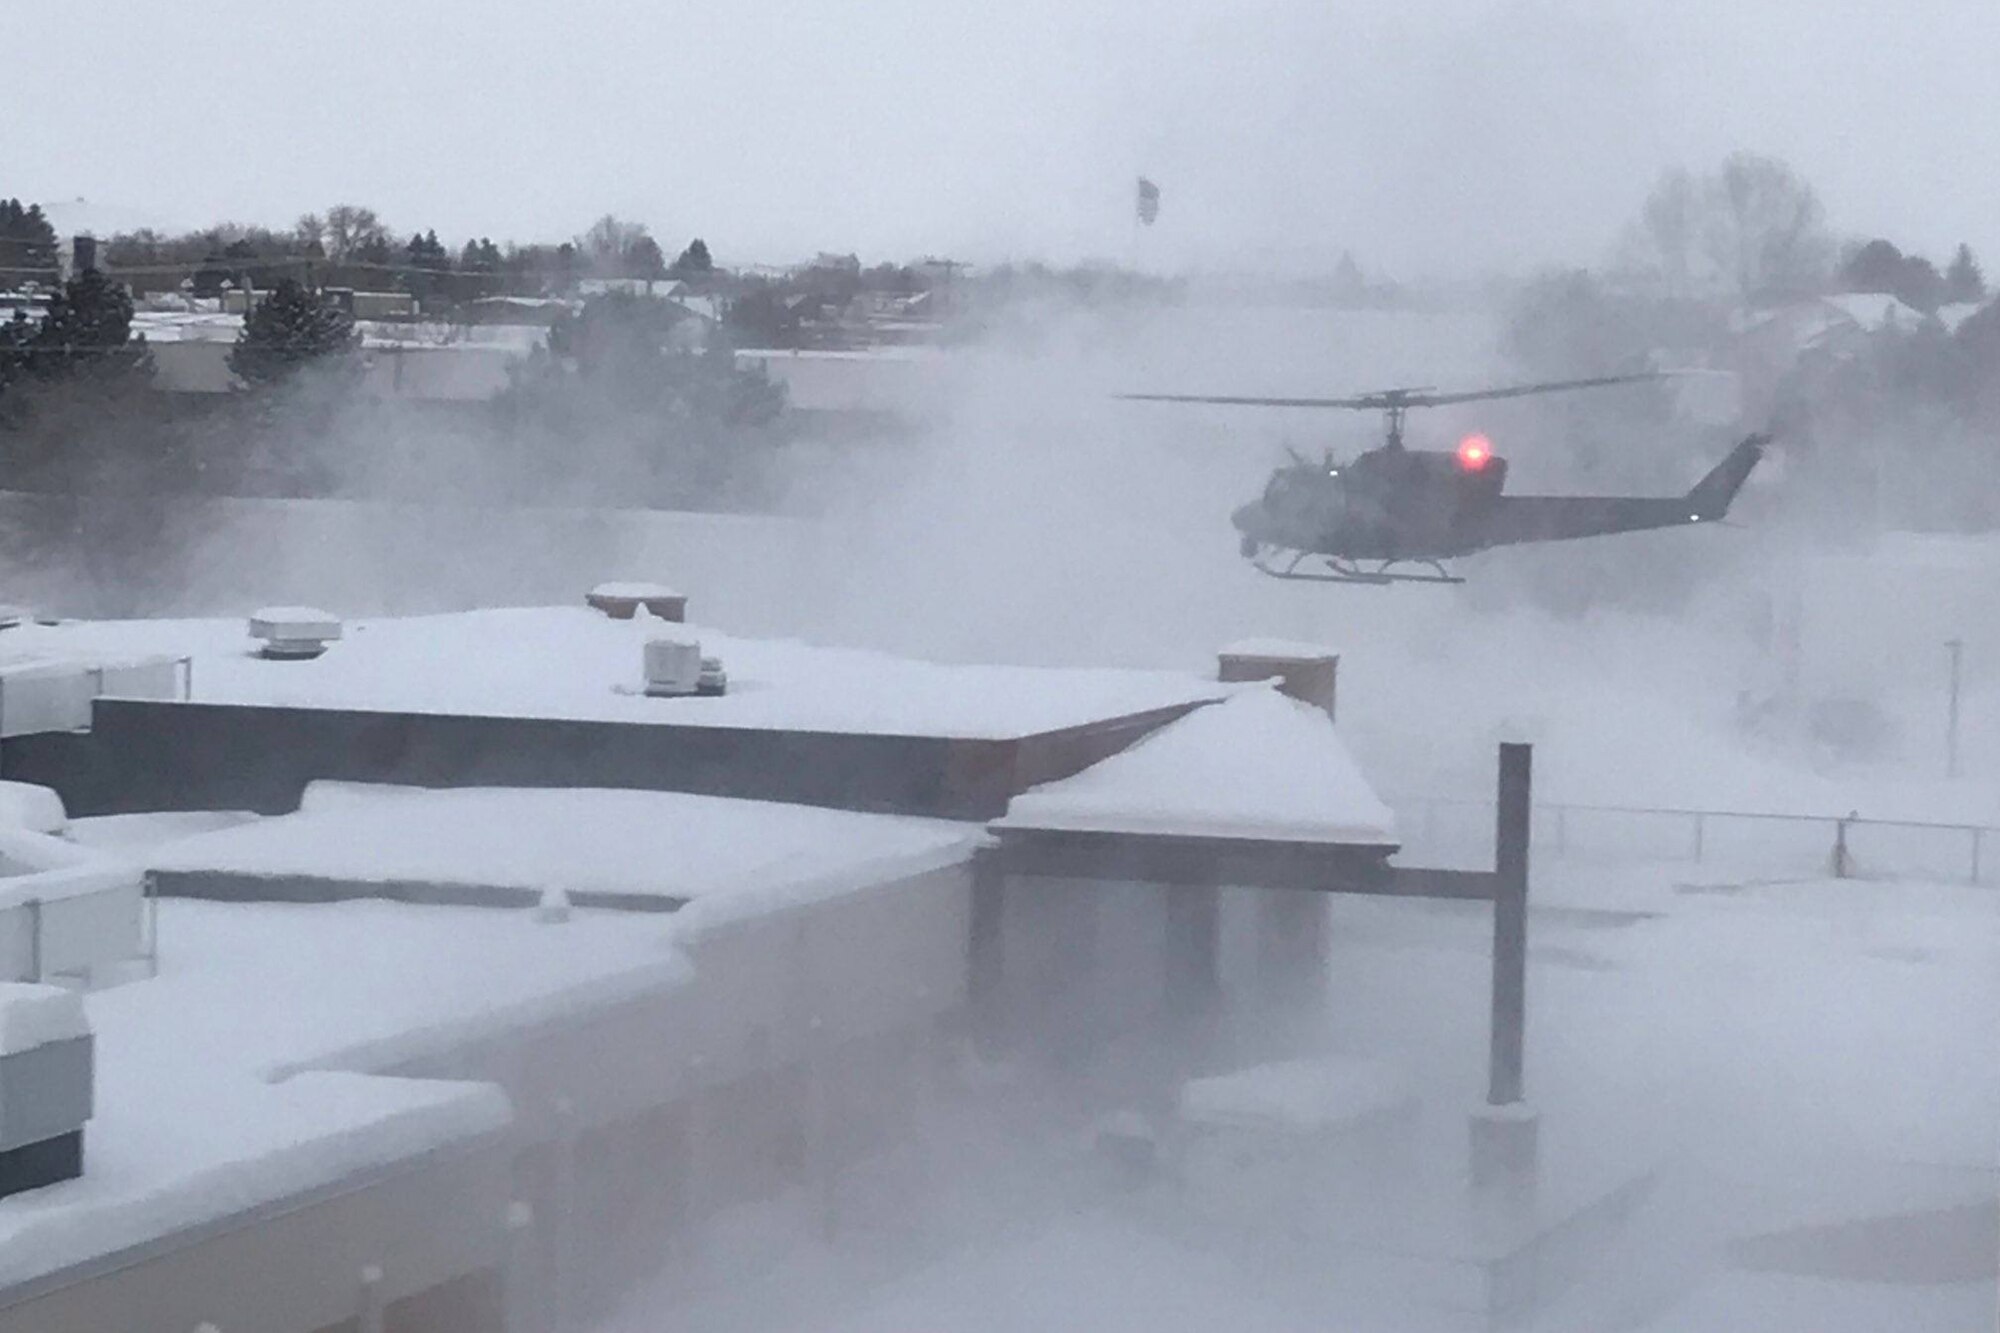 Aircrew from the 40th Helicopter Squadron begin to land at Benefis Hospital in Great Falls after a successful search and rescue March 1, 2019.